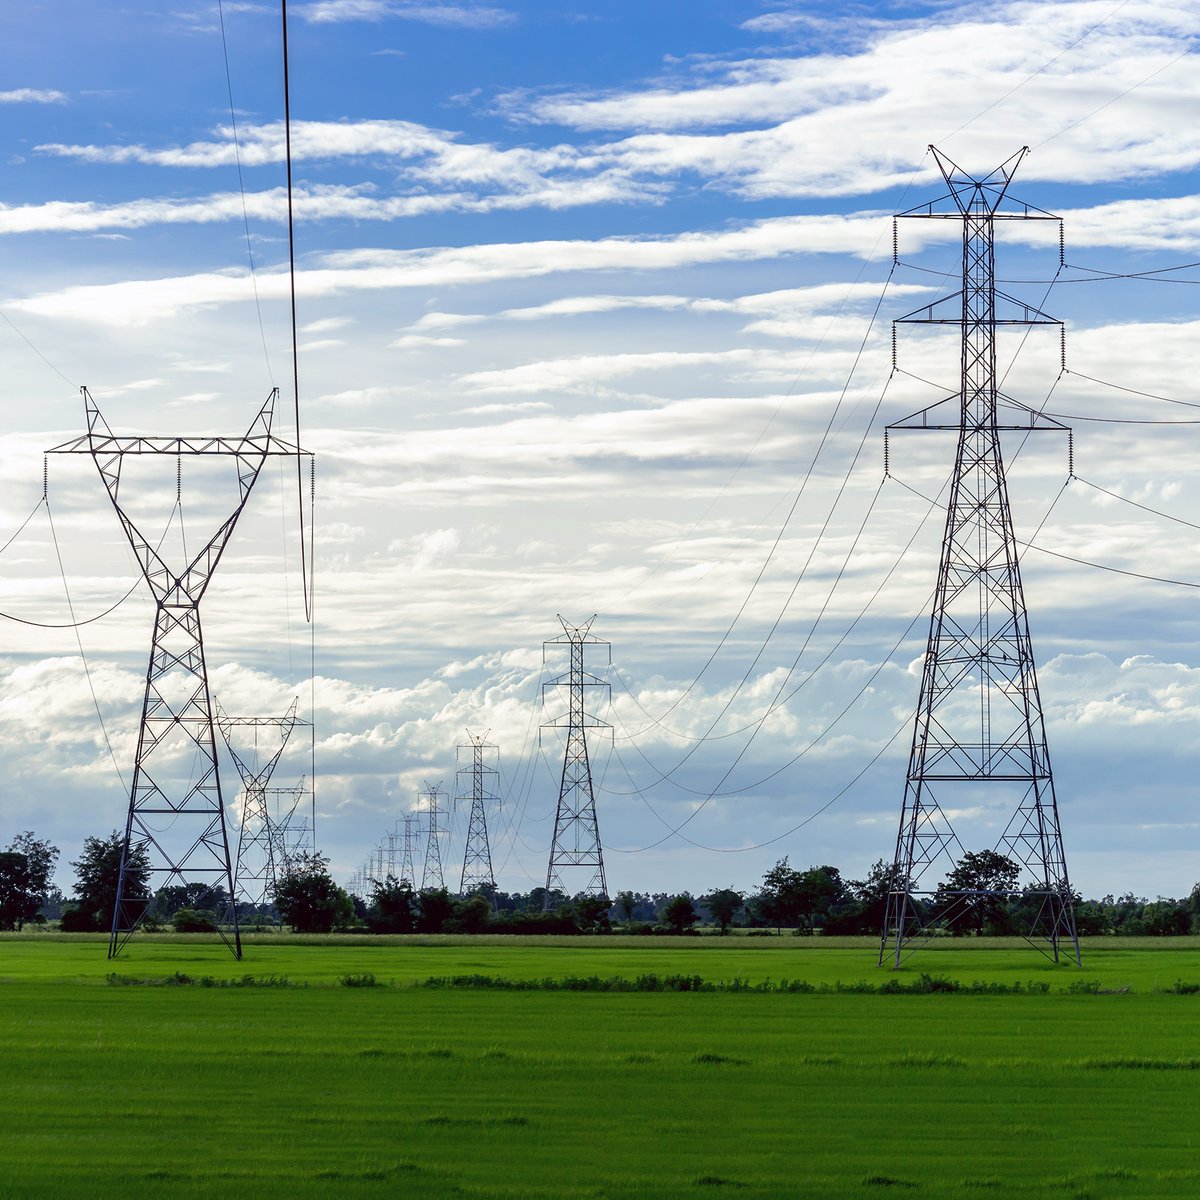 The National Grid has announced plans for approximately a £19 billion investment in new pylons and transmission lines across the UK.

By doing this we will likely limit the current capacity issues with the existing grid infrastructure.

#waterheaterwednesday #ukmfg #britishmade